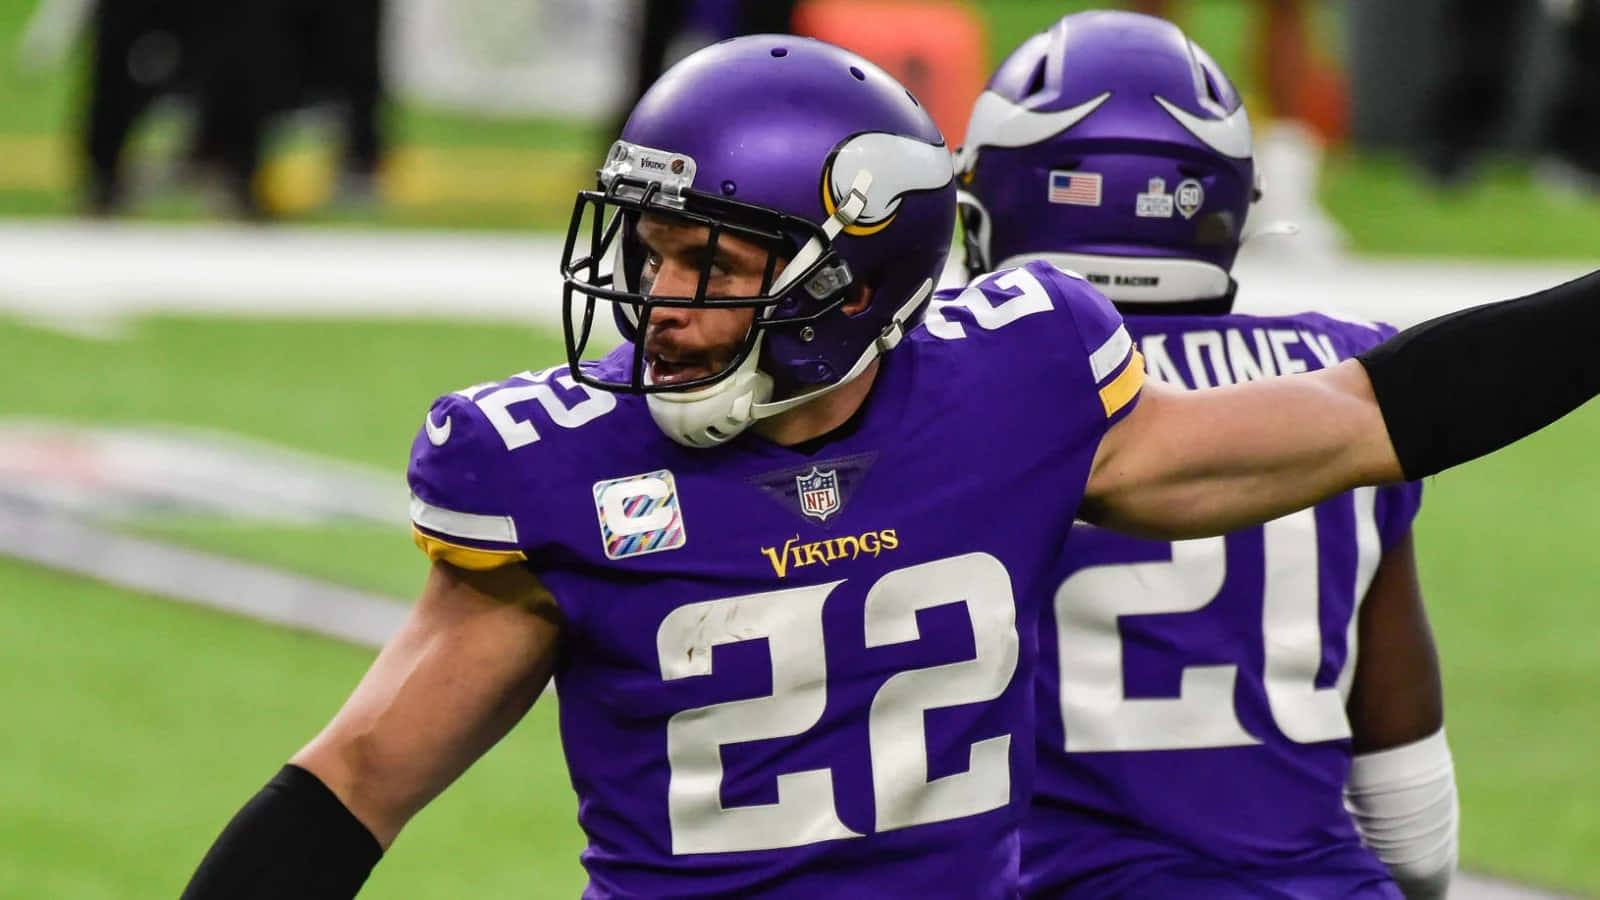 Vikings Safety Harrison Smith Action Wallpaper